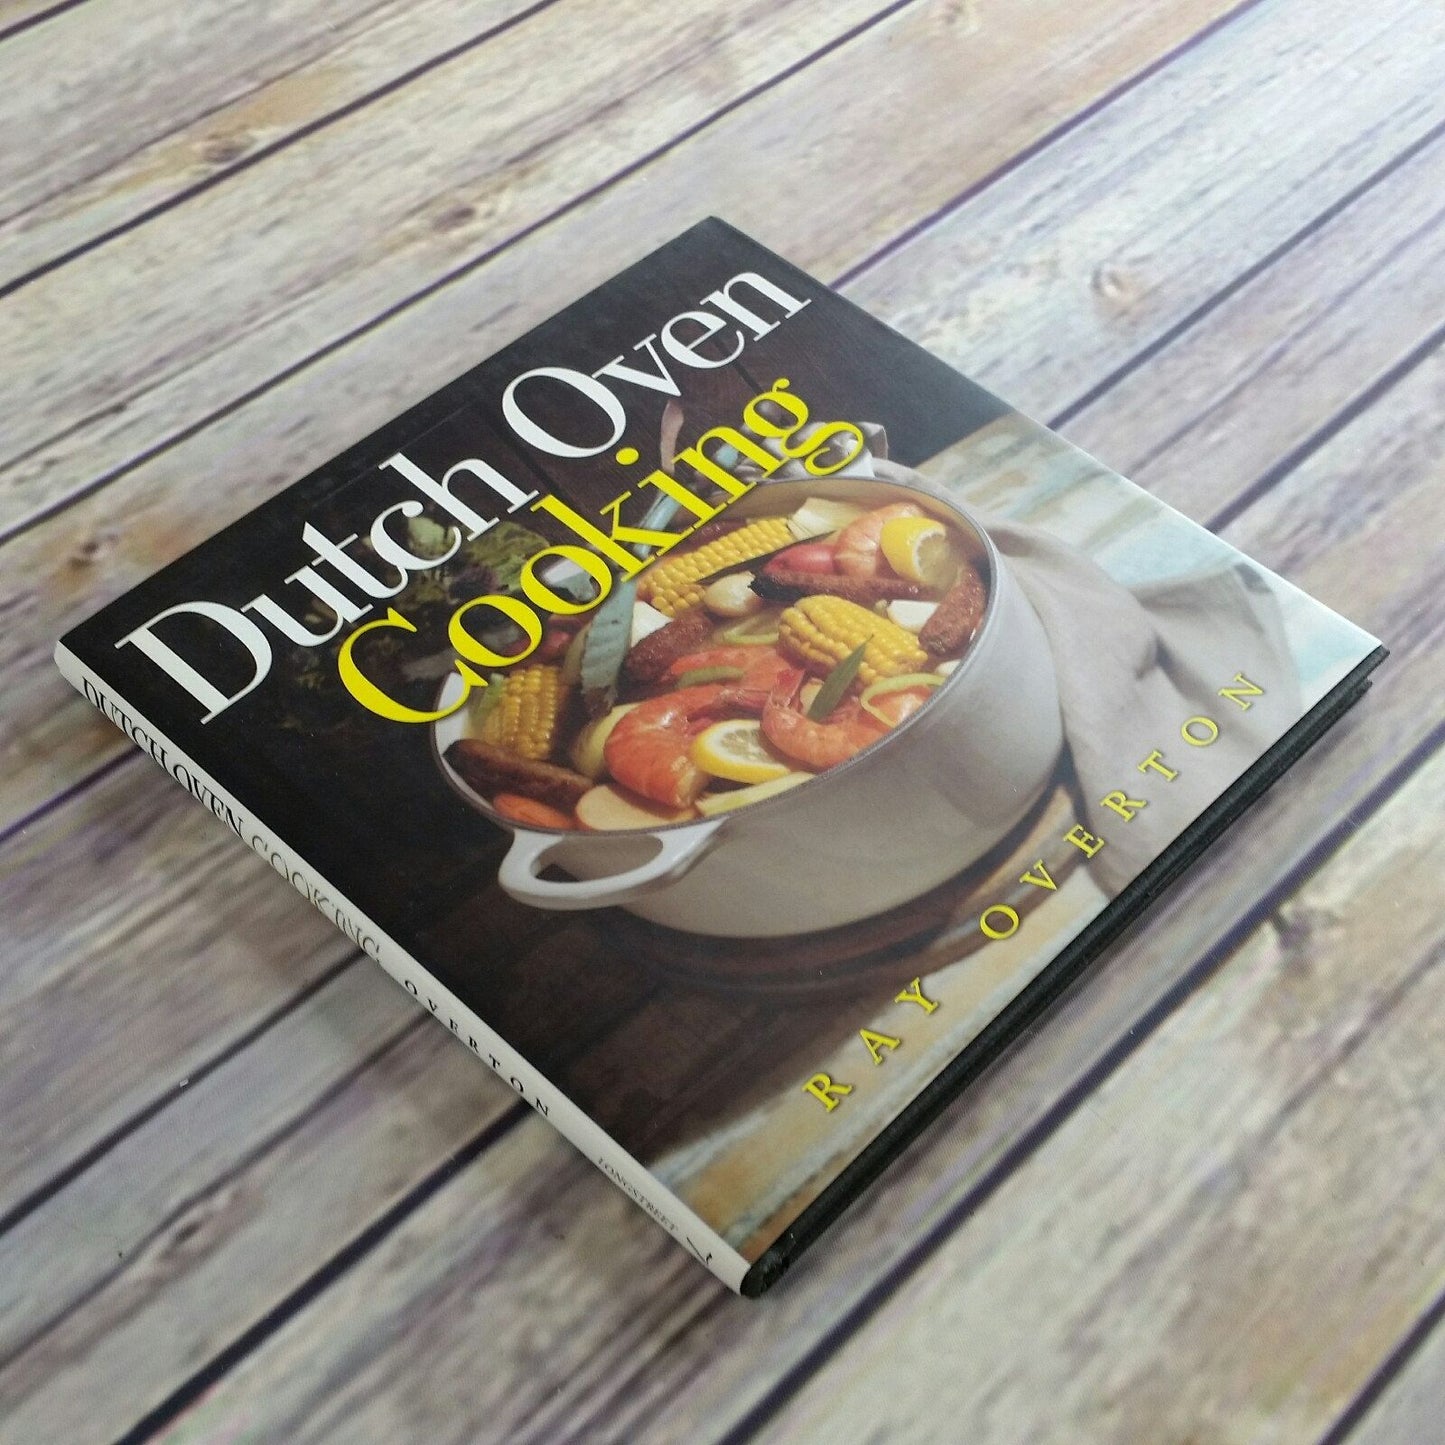 Vintage Cookbook Dutch Oven Cooking Recipes 1998 Hardcover with Dust Jacket Ray Overton